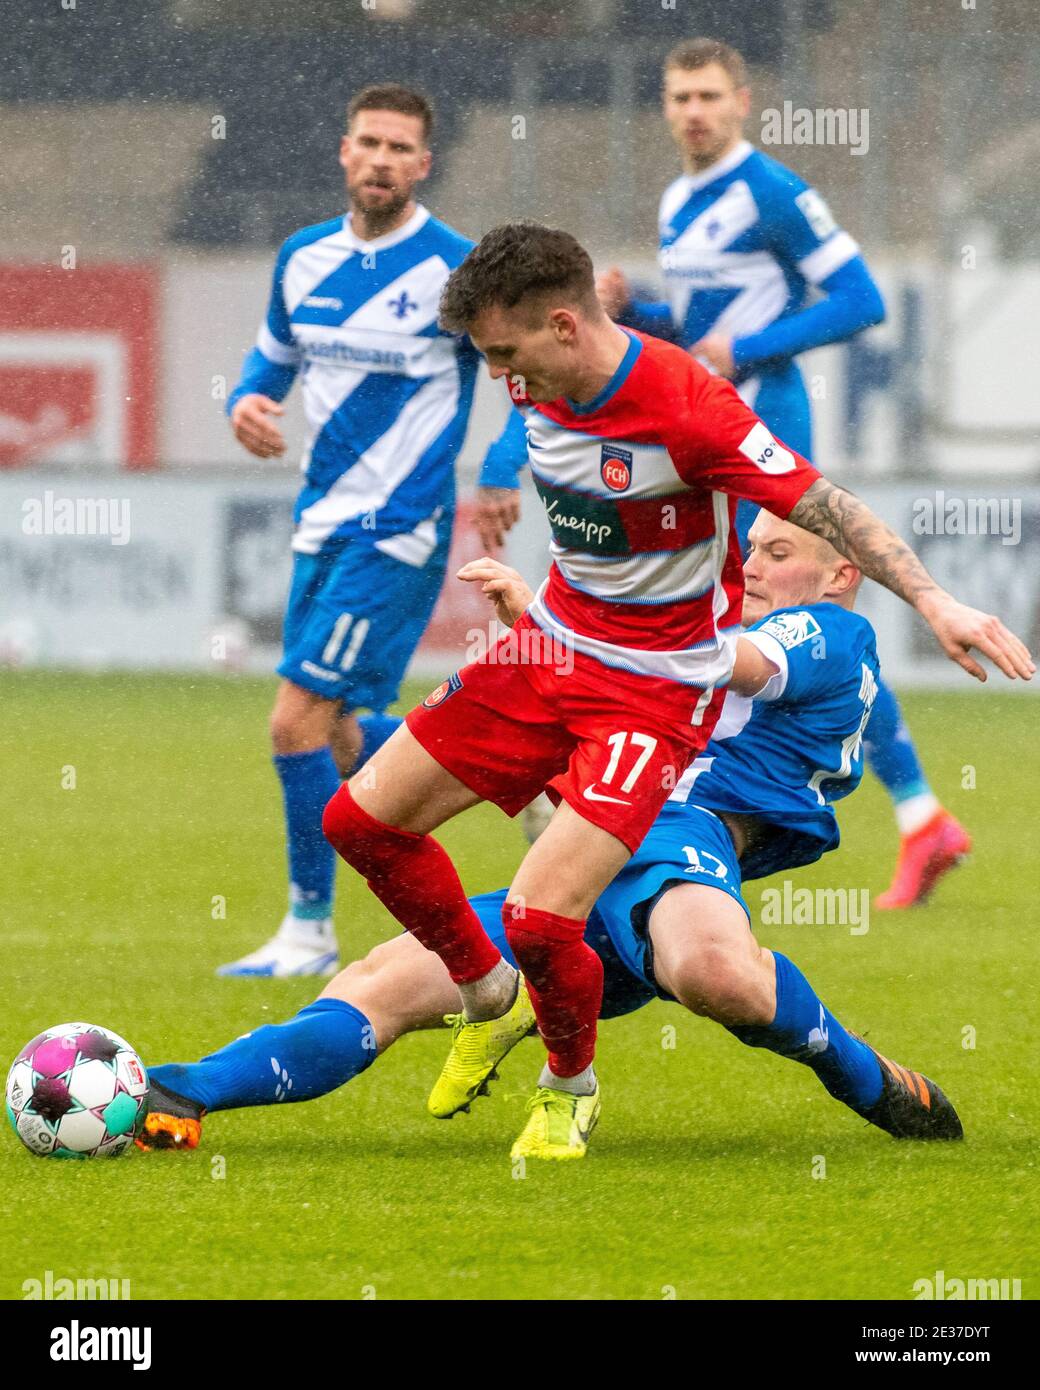 Heidenheim, Germany. 17th Jan, 2021. Soccer: 2. Bundesliga, 1. FC Heidenheim - Darmstadt 98, Matchday 16 at Voith-Arena. Heidenheim's Florian Pick (l) and Darmstadt's Lars Lukas Mai fight for the ball. Credit: Stefan Puchner/dpa - IMPORTANT NOTE: In accordance with the regulations of the DFL Deutsche Fußball Liga and/or the DFB Deutscher Fußball-Bund, it is prohibited to use or have used photographs taken in the stadium and/or of the match in the form of sequence pictures and/or video-like photo series./dpa/Alamy Live News Stock Photo